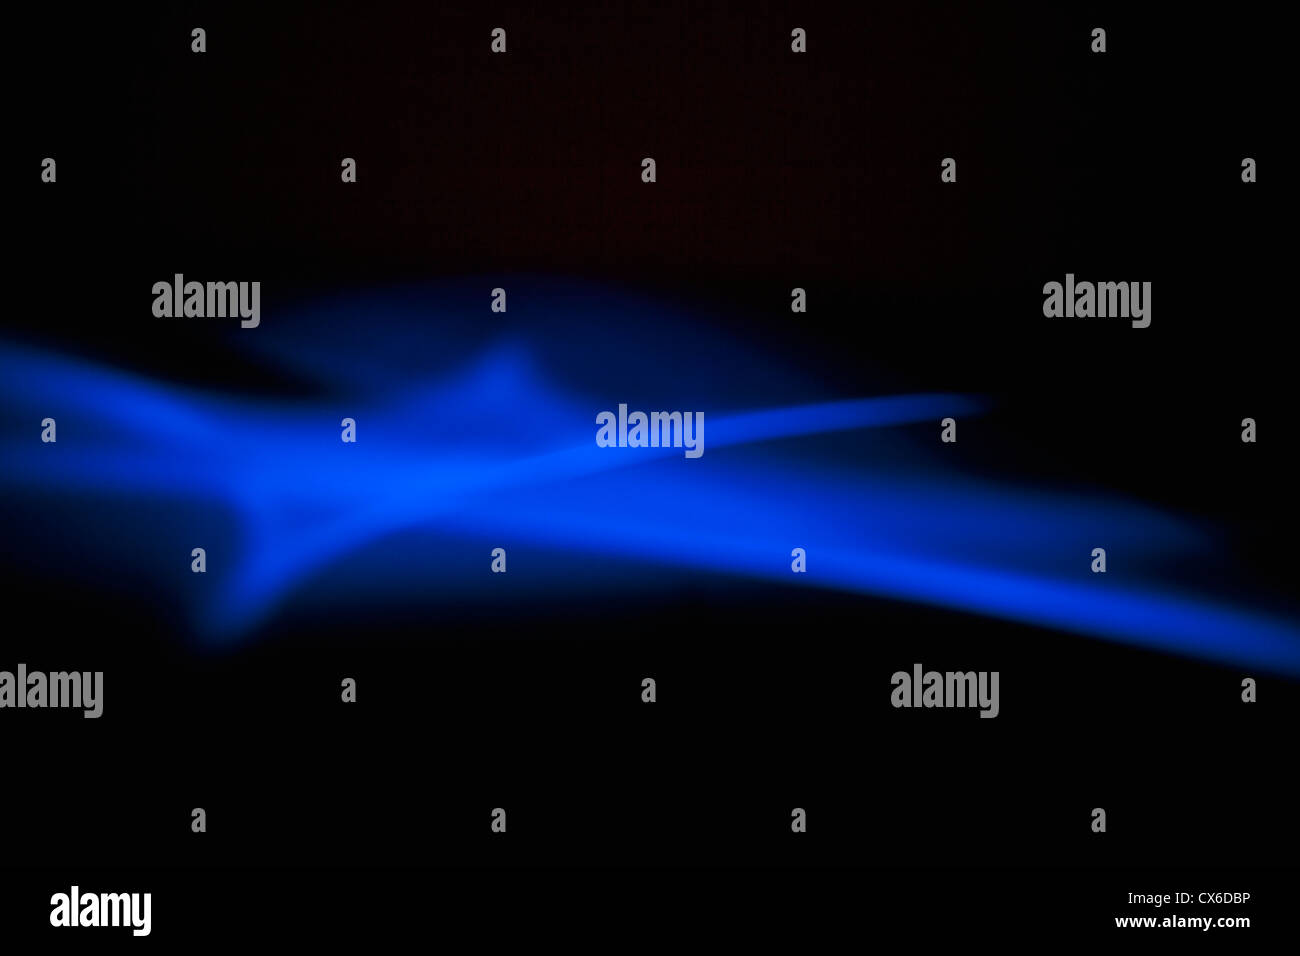 Blue light creating an ethereal effect on a black background Stock Photo